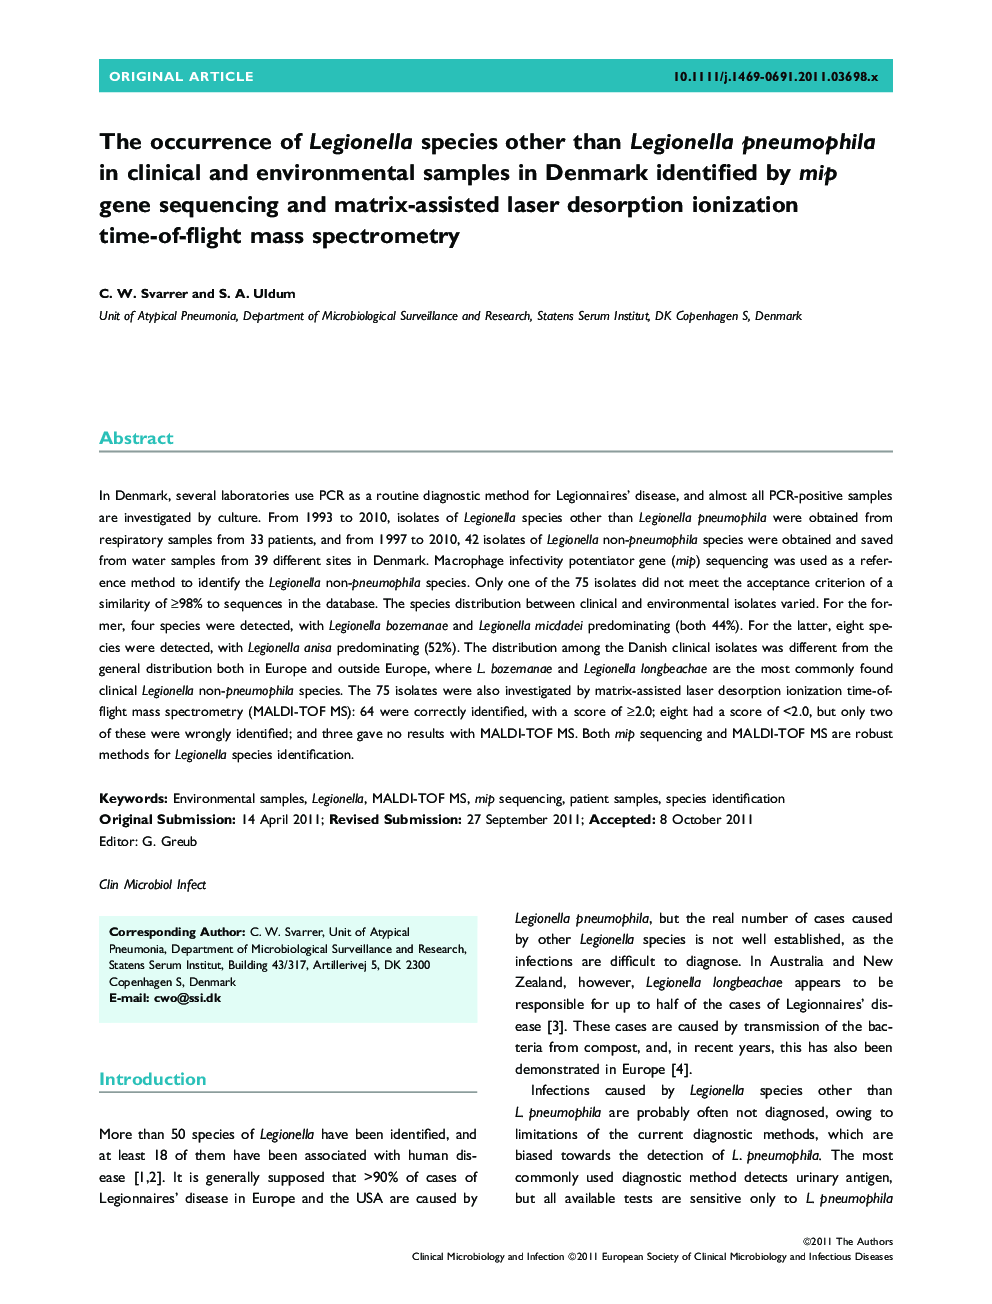 The occurrence of Legionella species other than Legionella pneumophila in clinical and environmental samples in Denmark identified by mip gene sequencing and matrix-assisted laser desorption ionization time-of-flight mass spectrometry